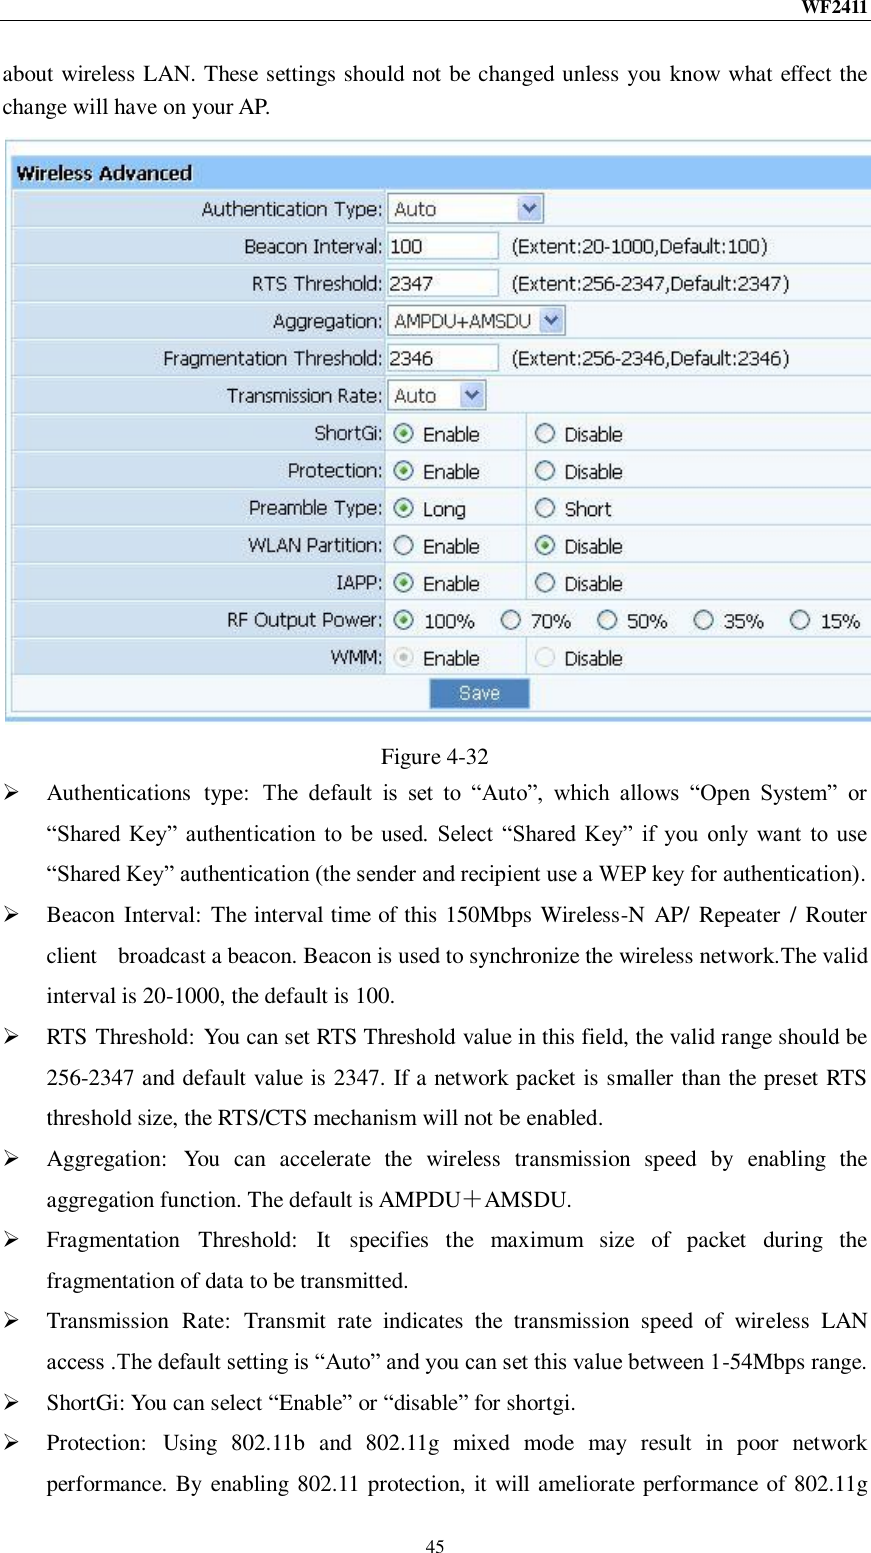 WF2411  45 about wireless LAN. These settings should not be changed unless you know what effect the change will have on your AP.  Figure 4-32  Authentications  type:  The  default  is  set  to  “Auto”,  which  allows  “Open  System”  or “Shared  Key”  authentication  to  be  used.  Select  “Shared  Key”  if  you  only  want  to  use “Shared Key” authentication (the sender and recipient use a WEP key for authentication).  Beacon  Interval:  The interval time of this 150Mbps Wireless-N  AP/  Repeater  / Router client    broadcast a beacon. Beacon is used to synchronize the wireless network.The valid interval is 20-1000, the default is 100.  RTS Threshold: You can set RTS Threshold value in this field, the valid range should be 256-2347 and default value is 2347. If a network packet is smaller than the preset RTS threshold size, the RTS/CTS mechanism will not be enabled.  Aggregation:  You  can  accelerate  the  wireless  transmission  speed  by  enabling  the aggregation function. The default is AMPDU＋AMSDU.  Fragmentation  Threshold:  It  specifies  the  maximum  size  of  packet  during  the fragmentation of data to be transmitted.  Transmission  Rate:  Transmit  rate  indicates  the  transmission  speed  of  wireless  LAN access .The default setting is “Auto” and you can set this value between 1-54Mbps range.  ShortGi: You can select “Enable” or “disable” for shortgi.  Protection:  Using  802.11b  and  802.11g  mixed  mode  may  result  in  poor  network performance. By enabling 802.11 protection, it will ameliorate performance of 802.11g 